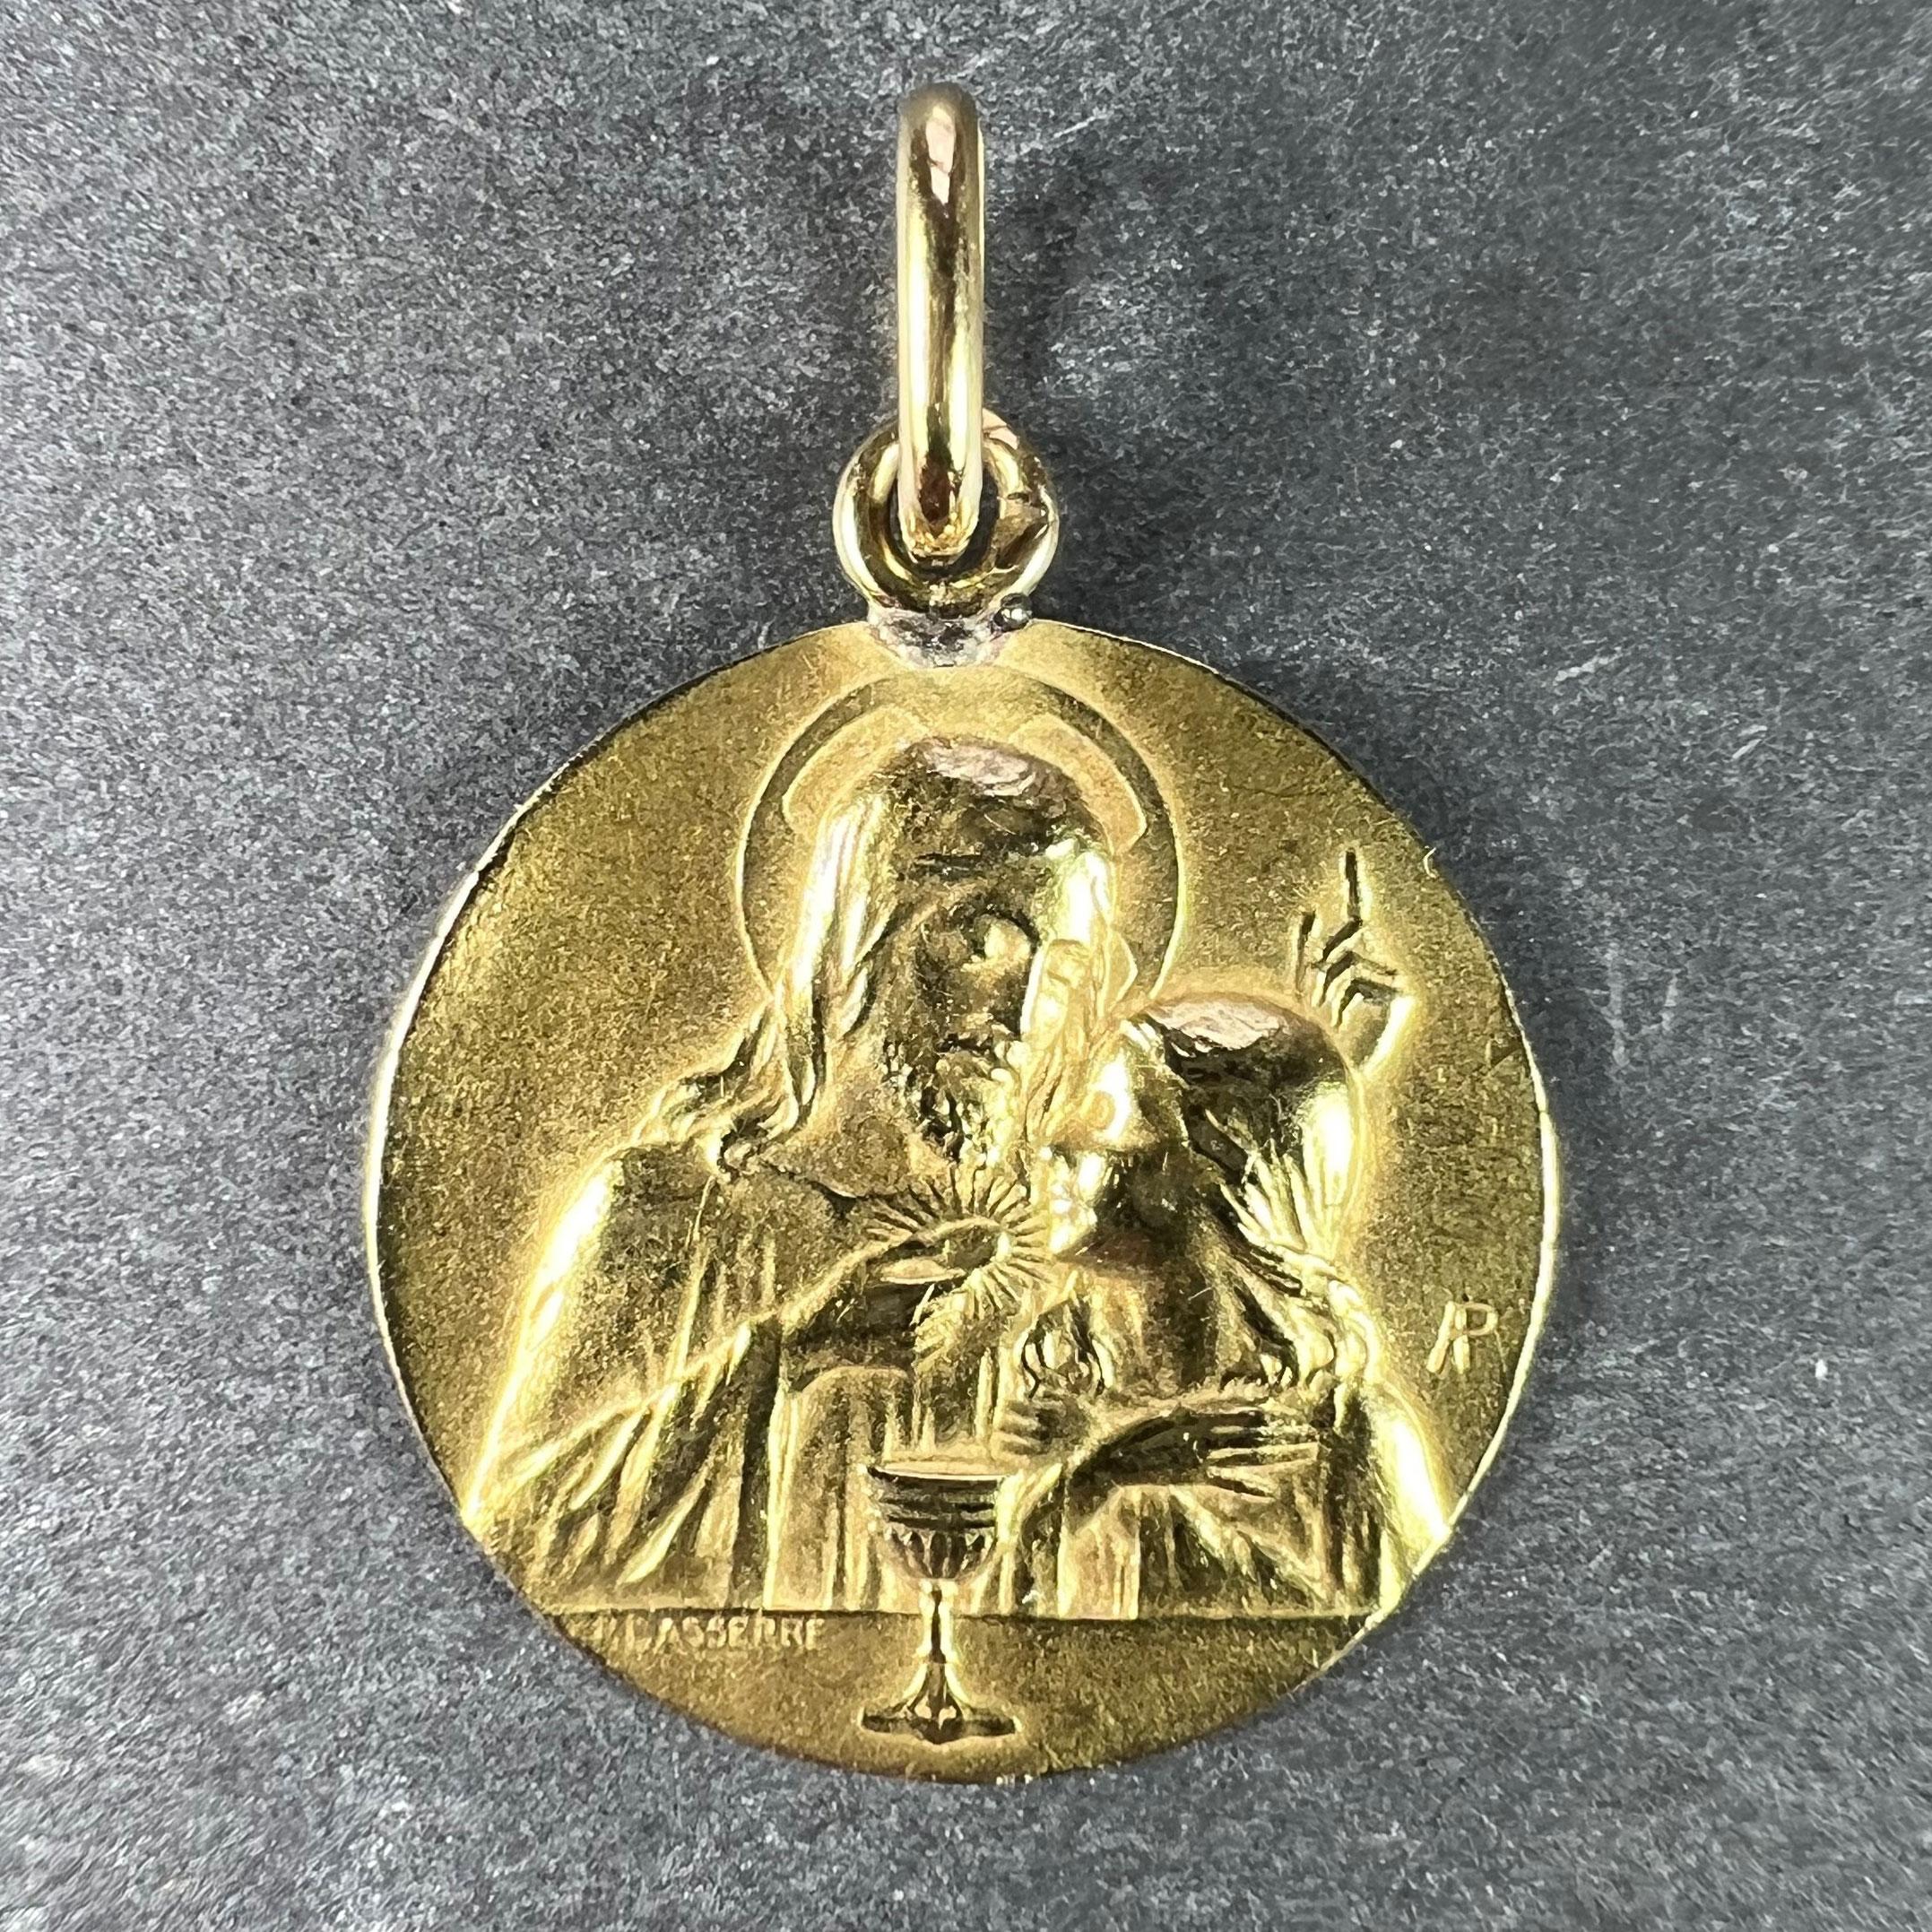 A French 18 karat (18K) yellow gold charm pendant designed as a medal depicting Jesus preparing the holy communion to one side. Signed Lasserre, with the eagle’s head for 18 karat gold and French manufacture and a partial unknown maker's